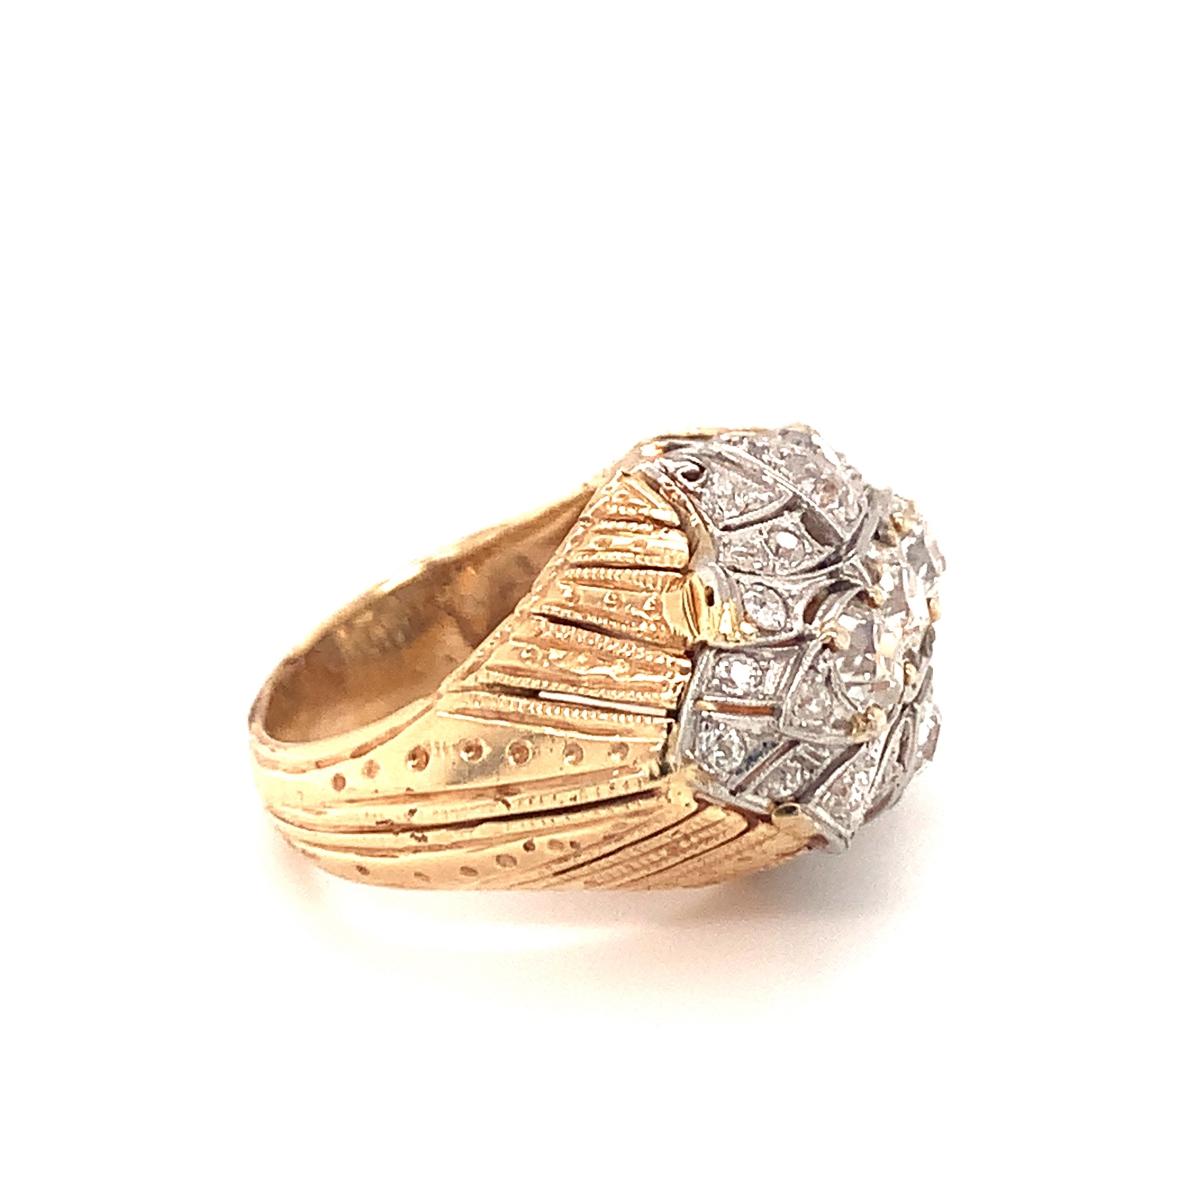 Vintage Diamond Platinum and 18K Yellow Gold Ring, circa 1960s For Sale 2